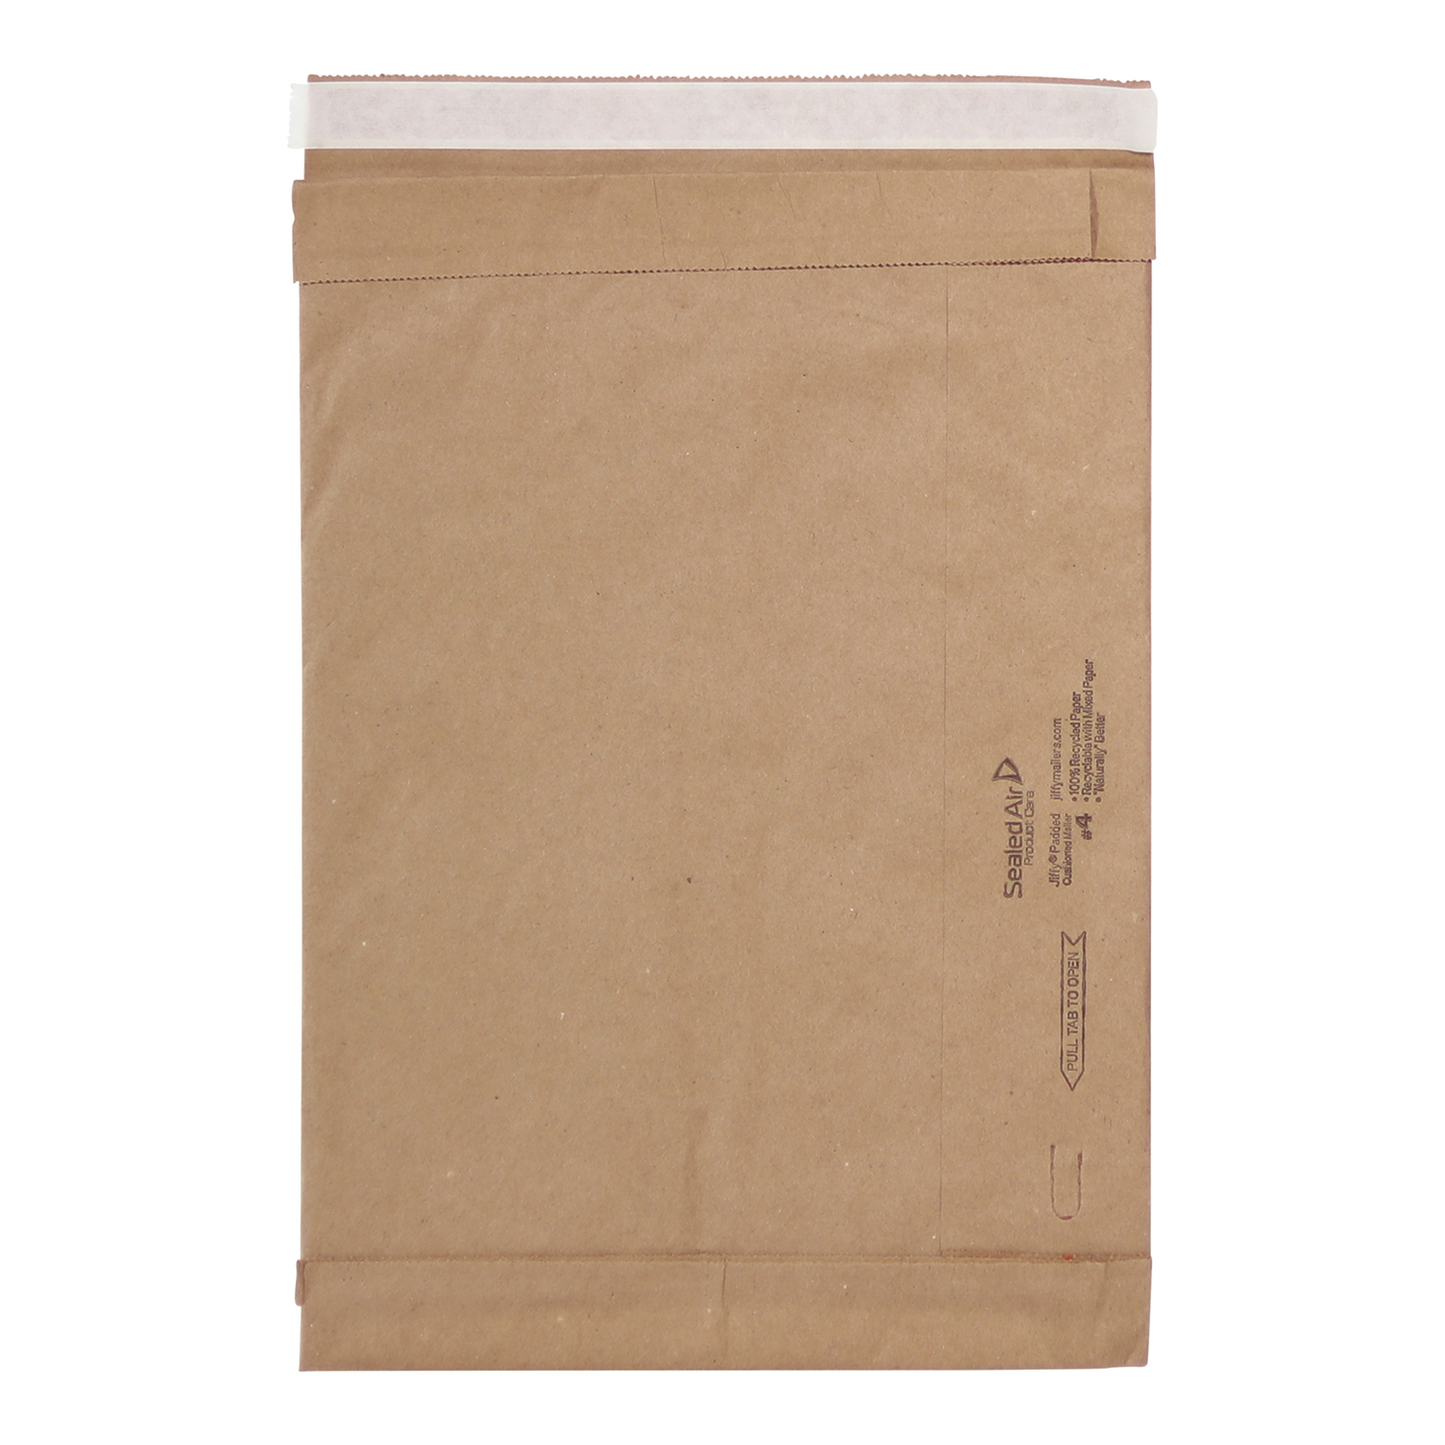 SEALED AIR® Brand Paper Padded Mailers (Jiffy® Padded)